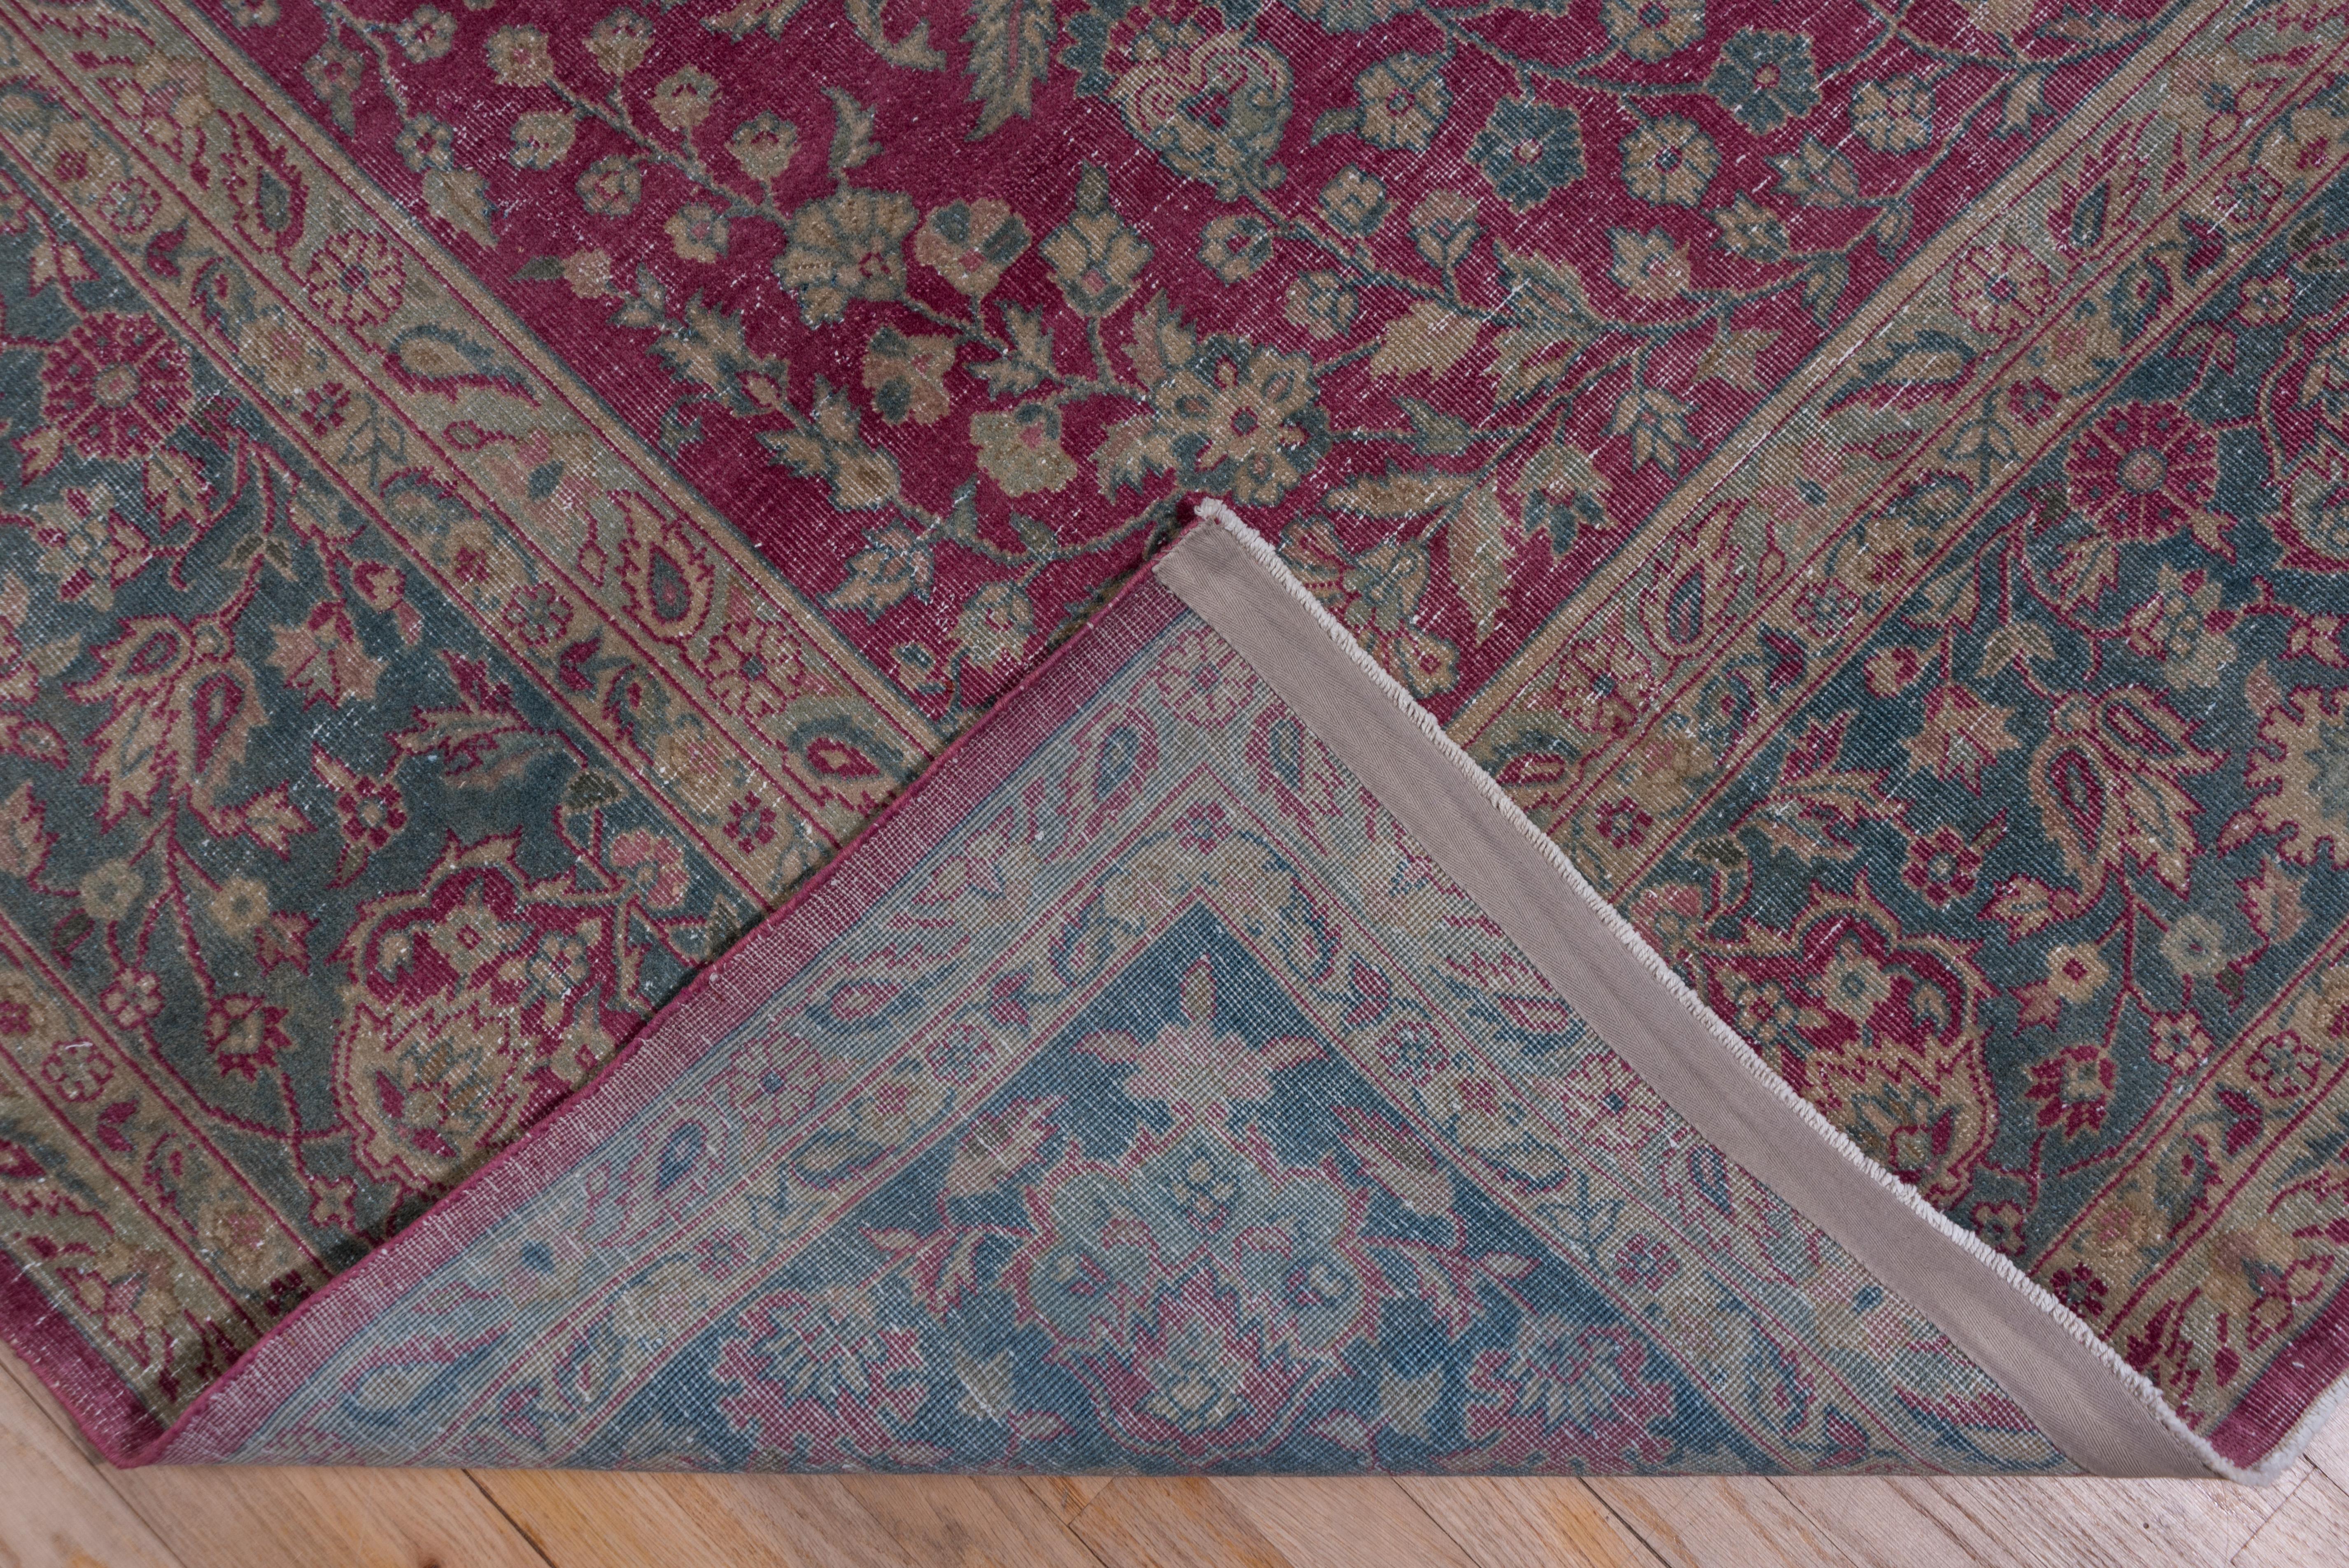 Antique Turkish Sivas Rug, Raspberry Red Field, Teal Borders, Circa 1930s For Sale 1